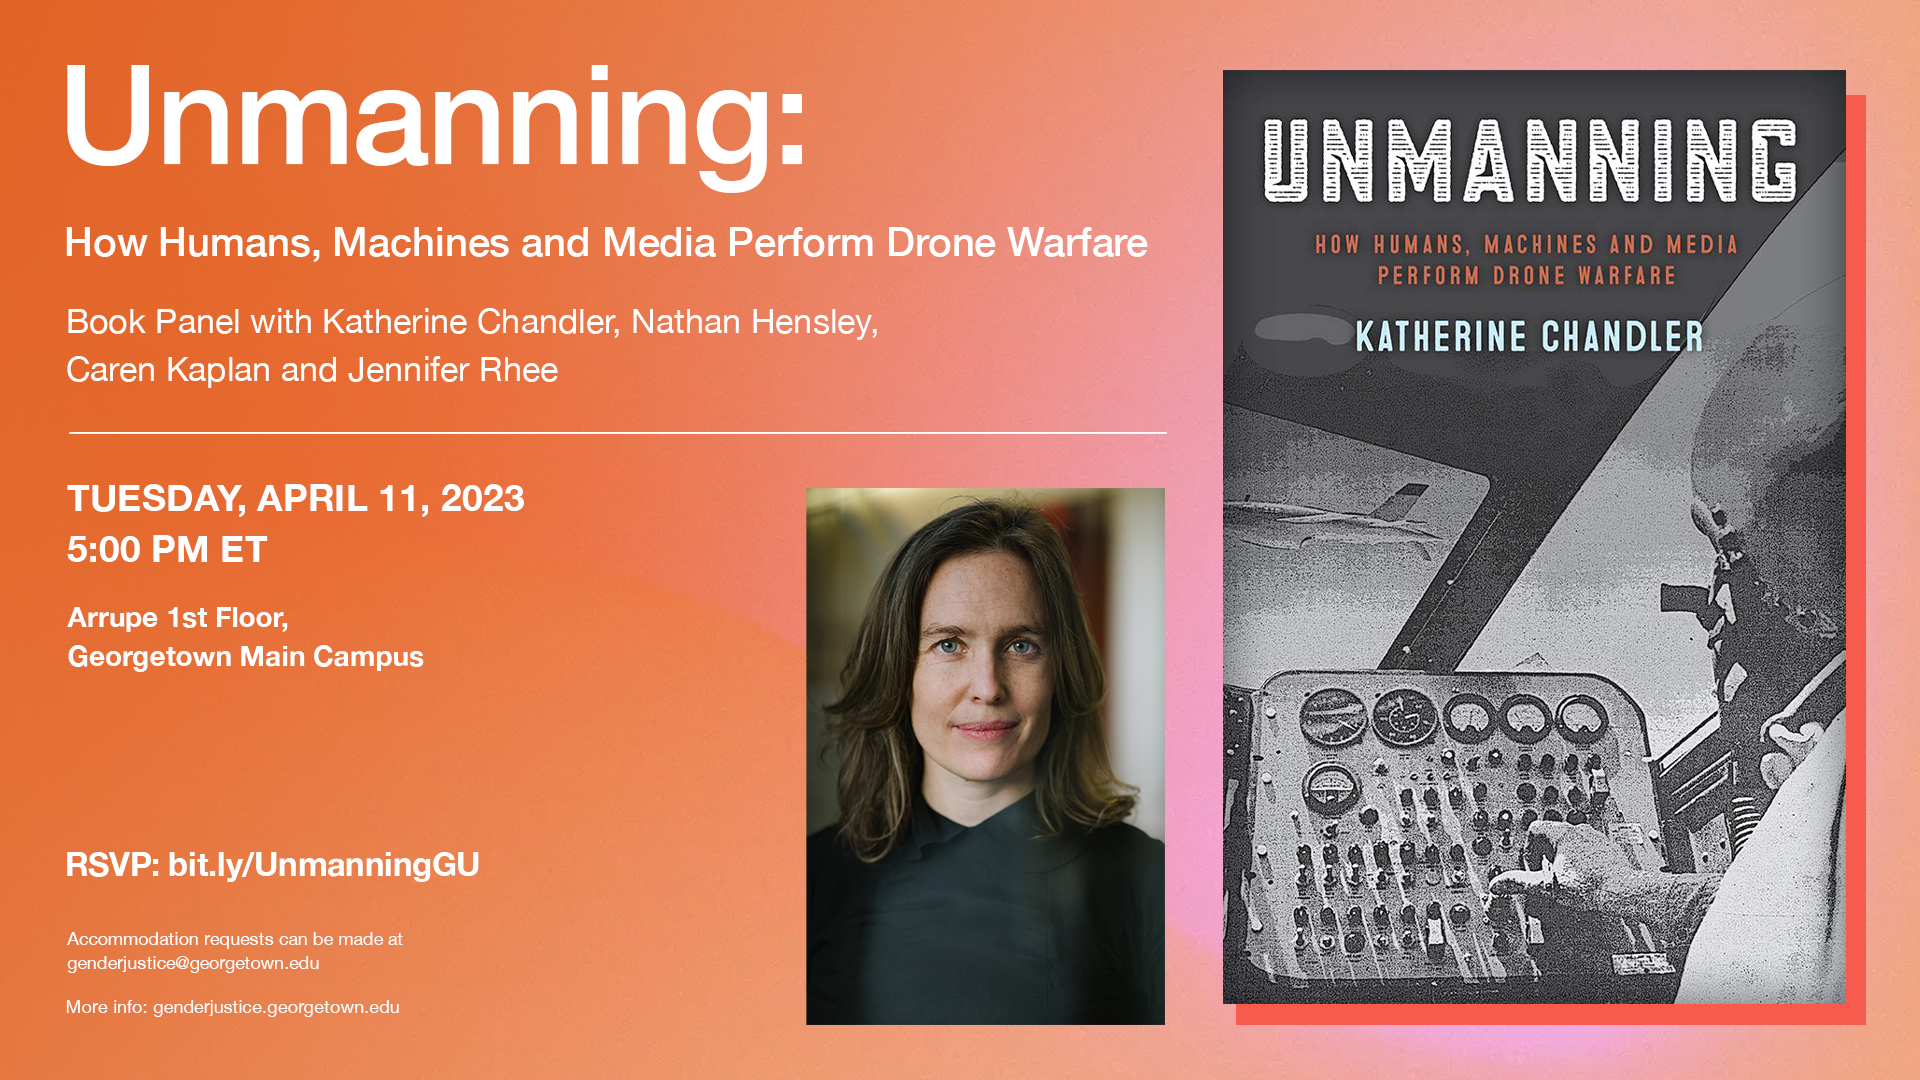 unamanning flyer, orange background, black text with details on event, center bottom headshot of author, white woman with black top smiling, right of image: picture of bookcover